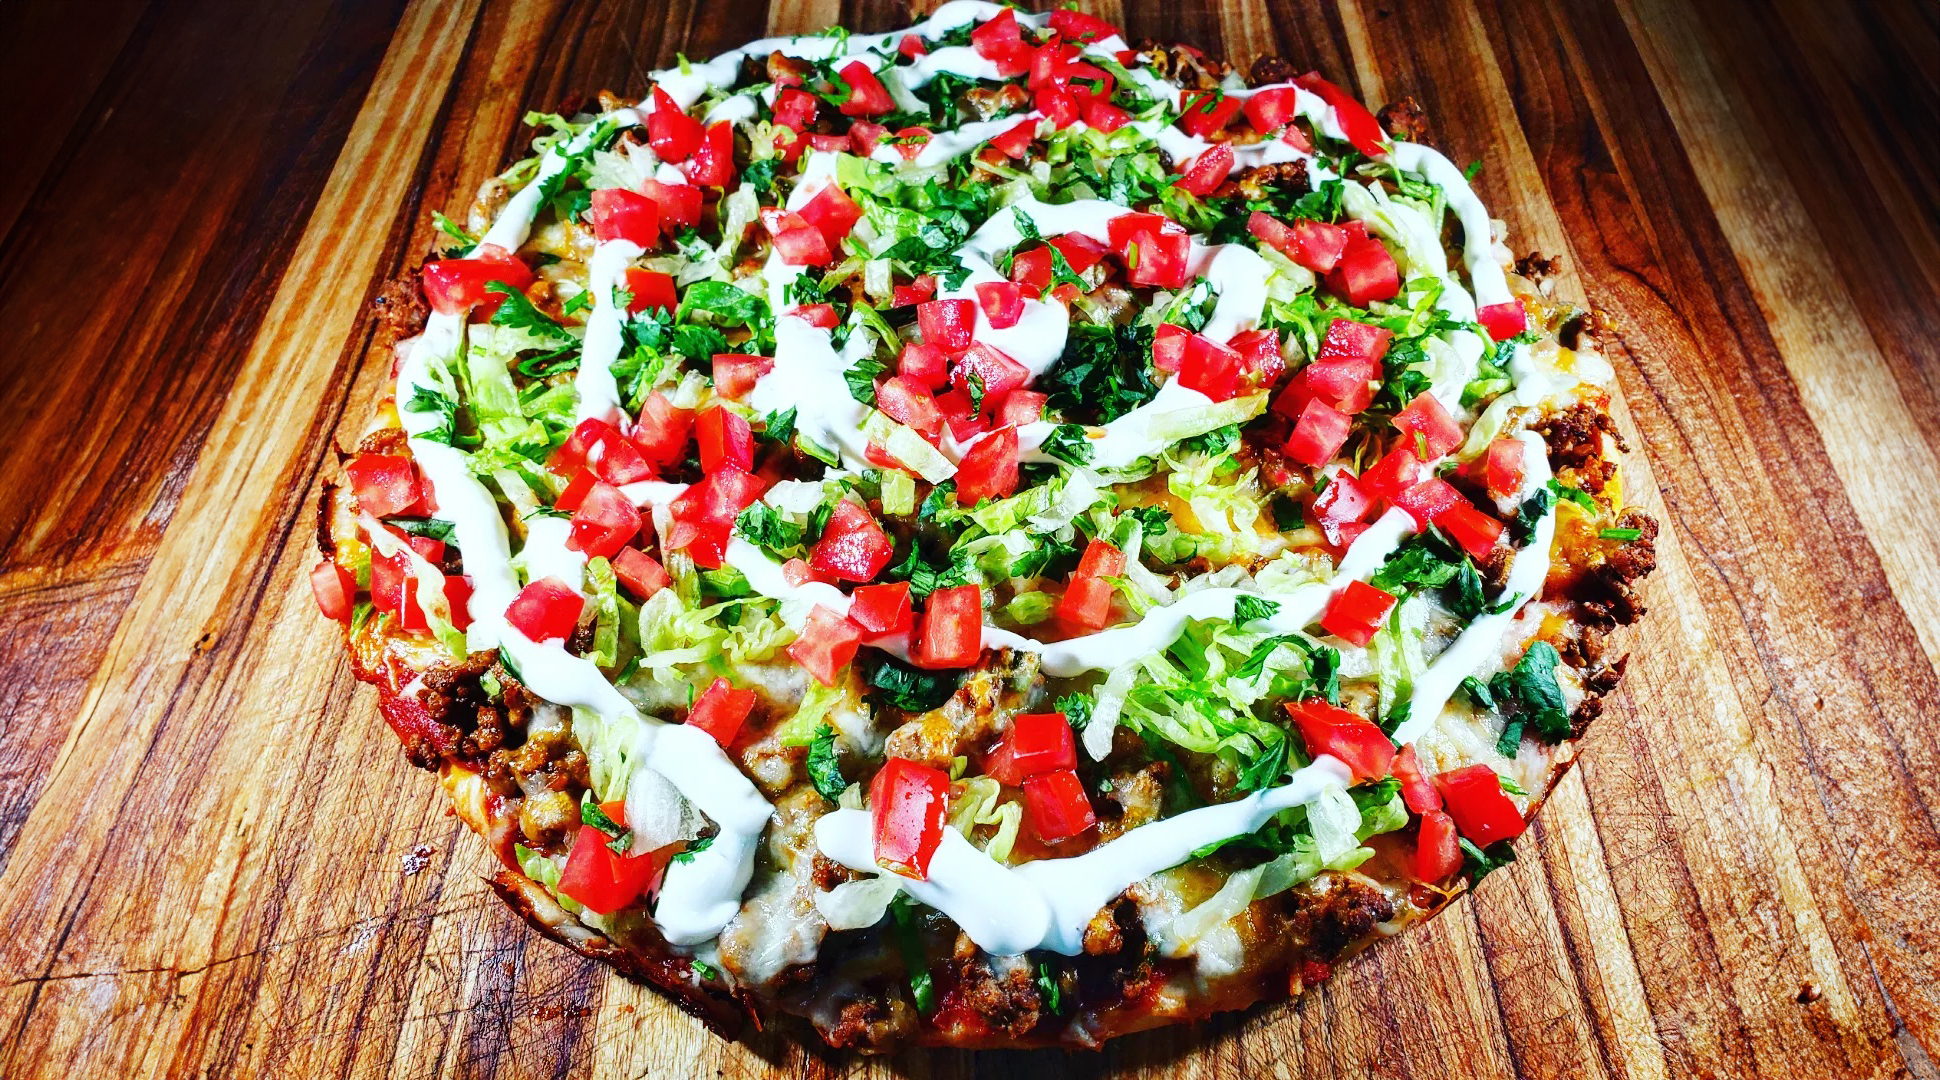 Taco pizza: Where pizza and tacos collide in delicious harmony